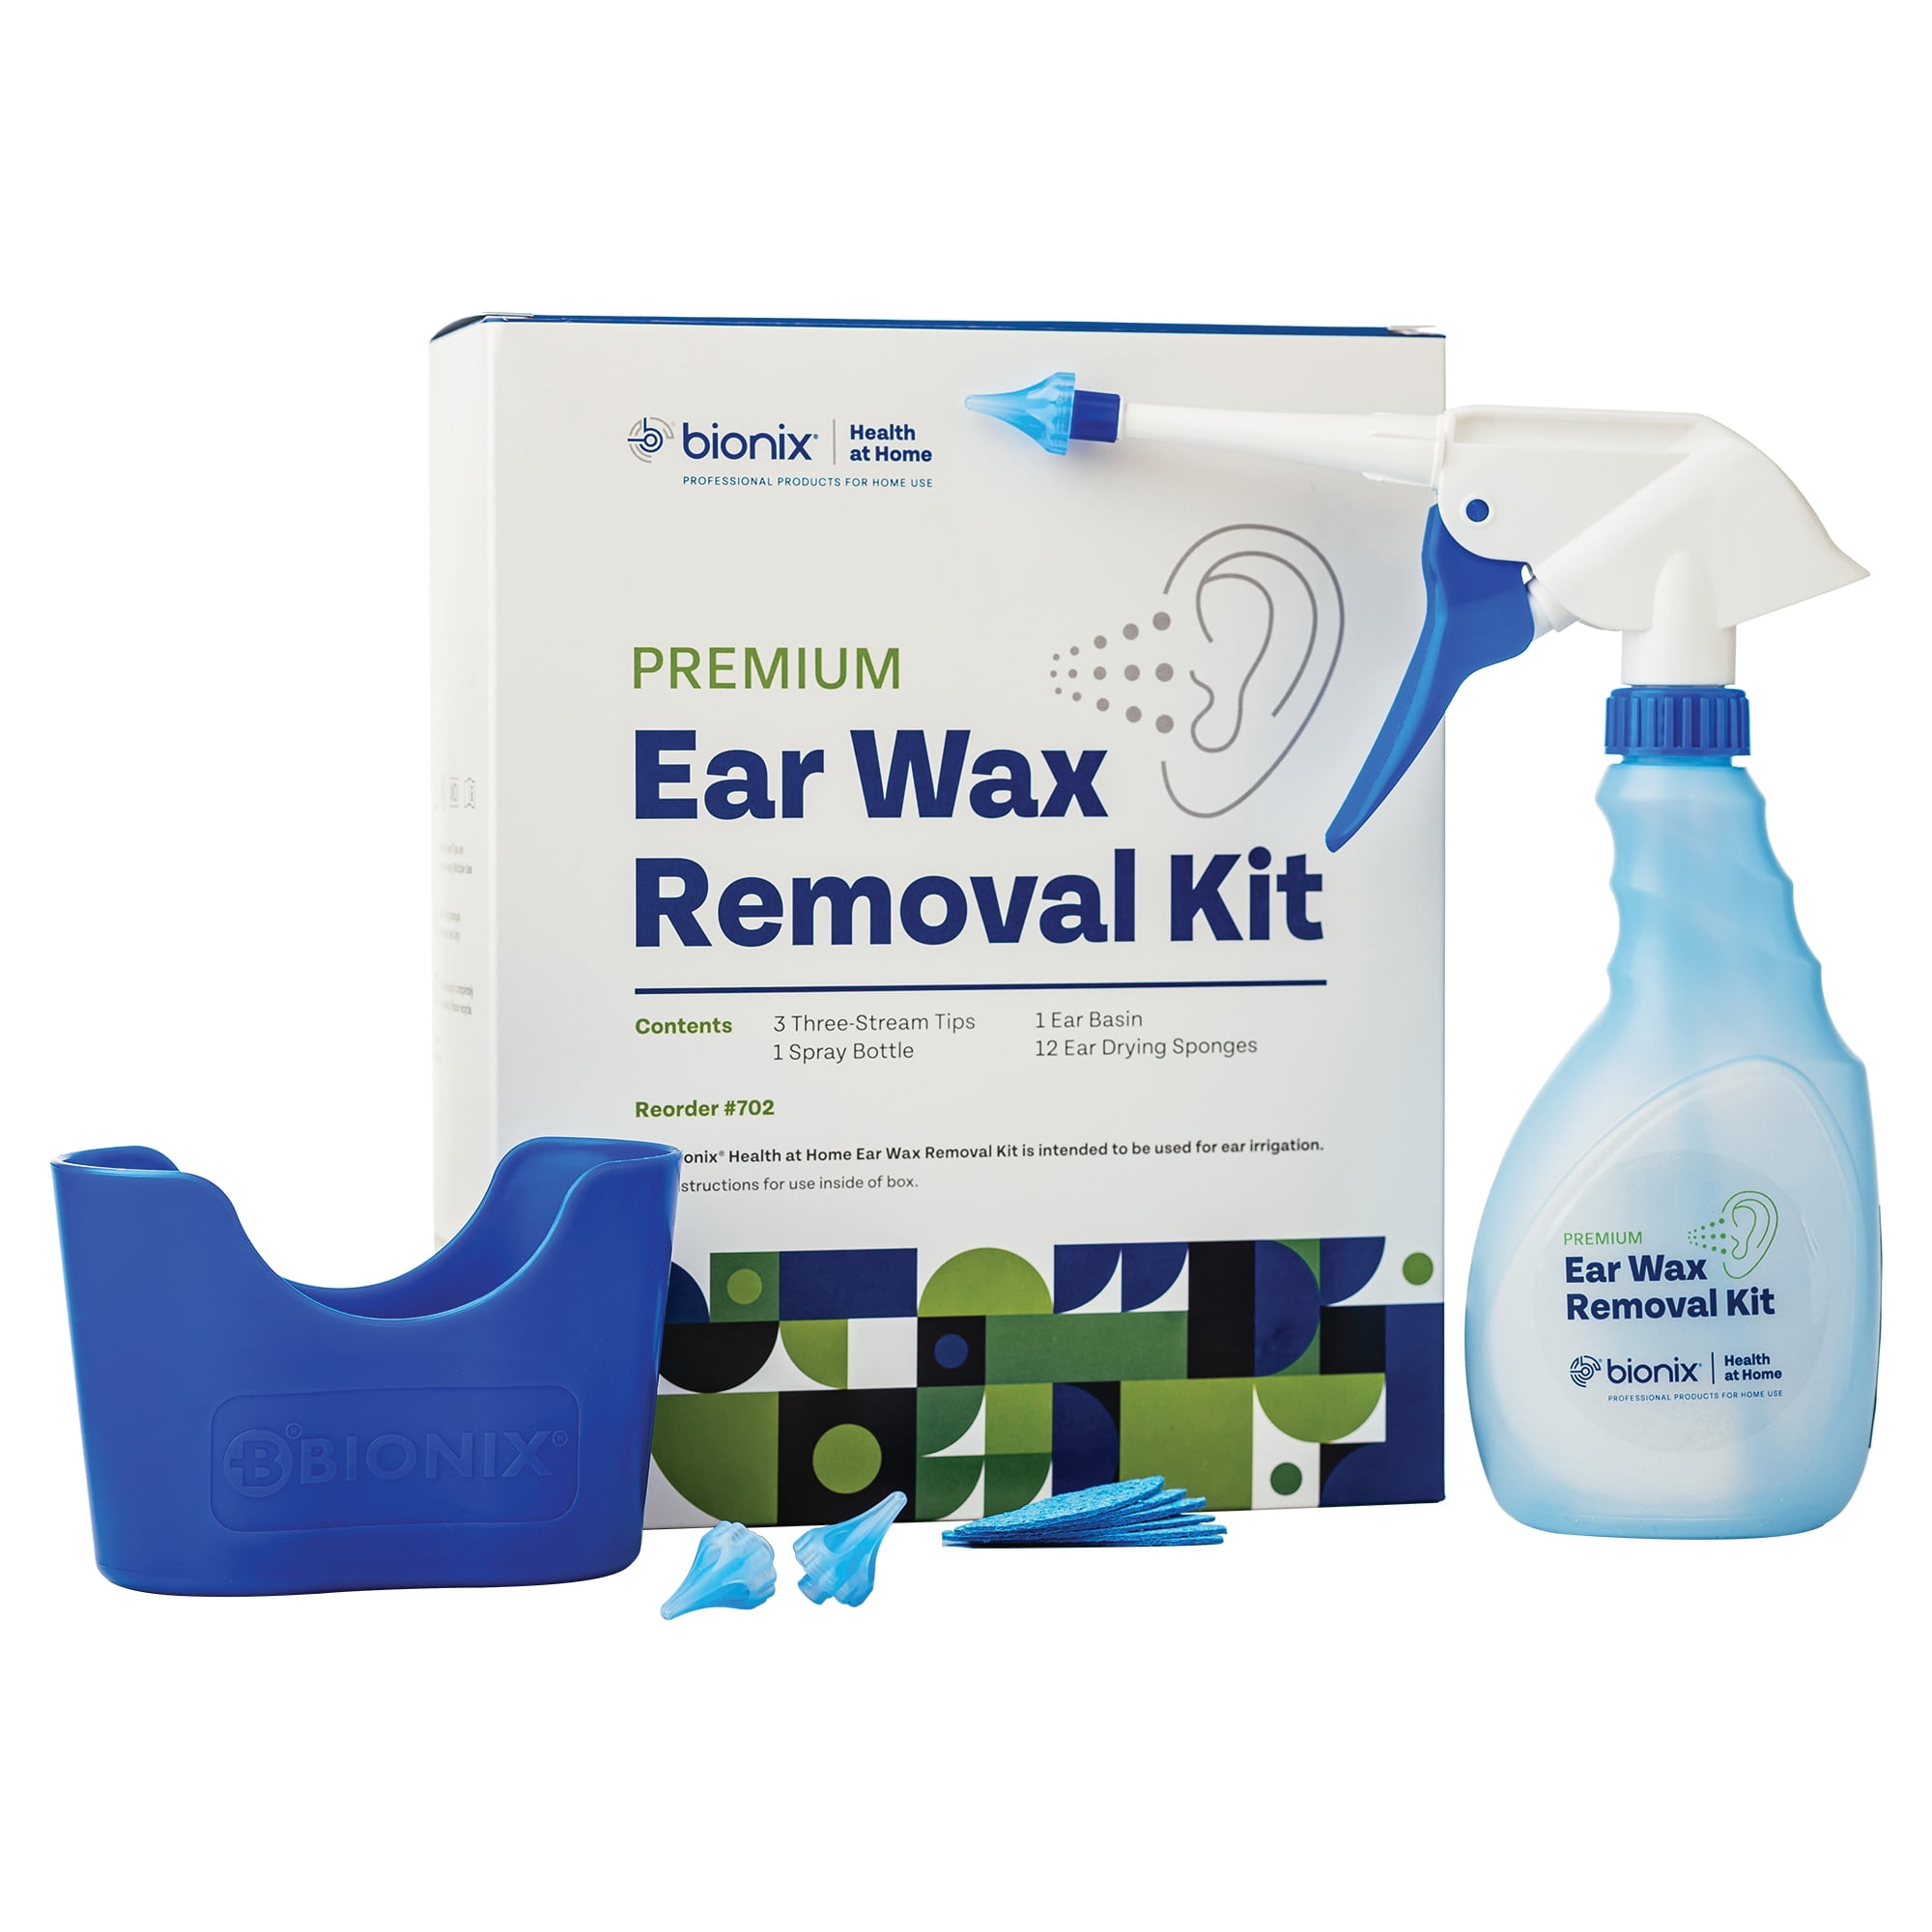 Ear wax removal: how to safely remove build-up at home - Which?